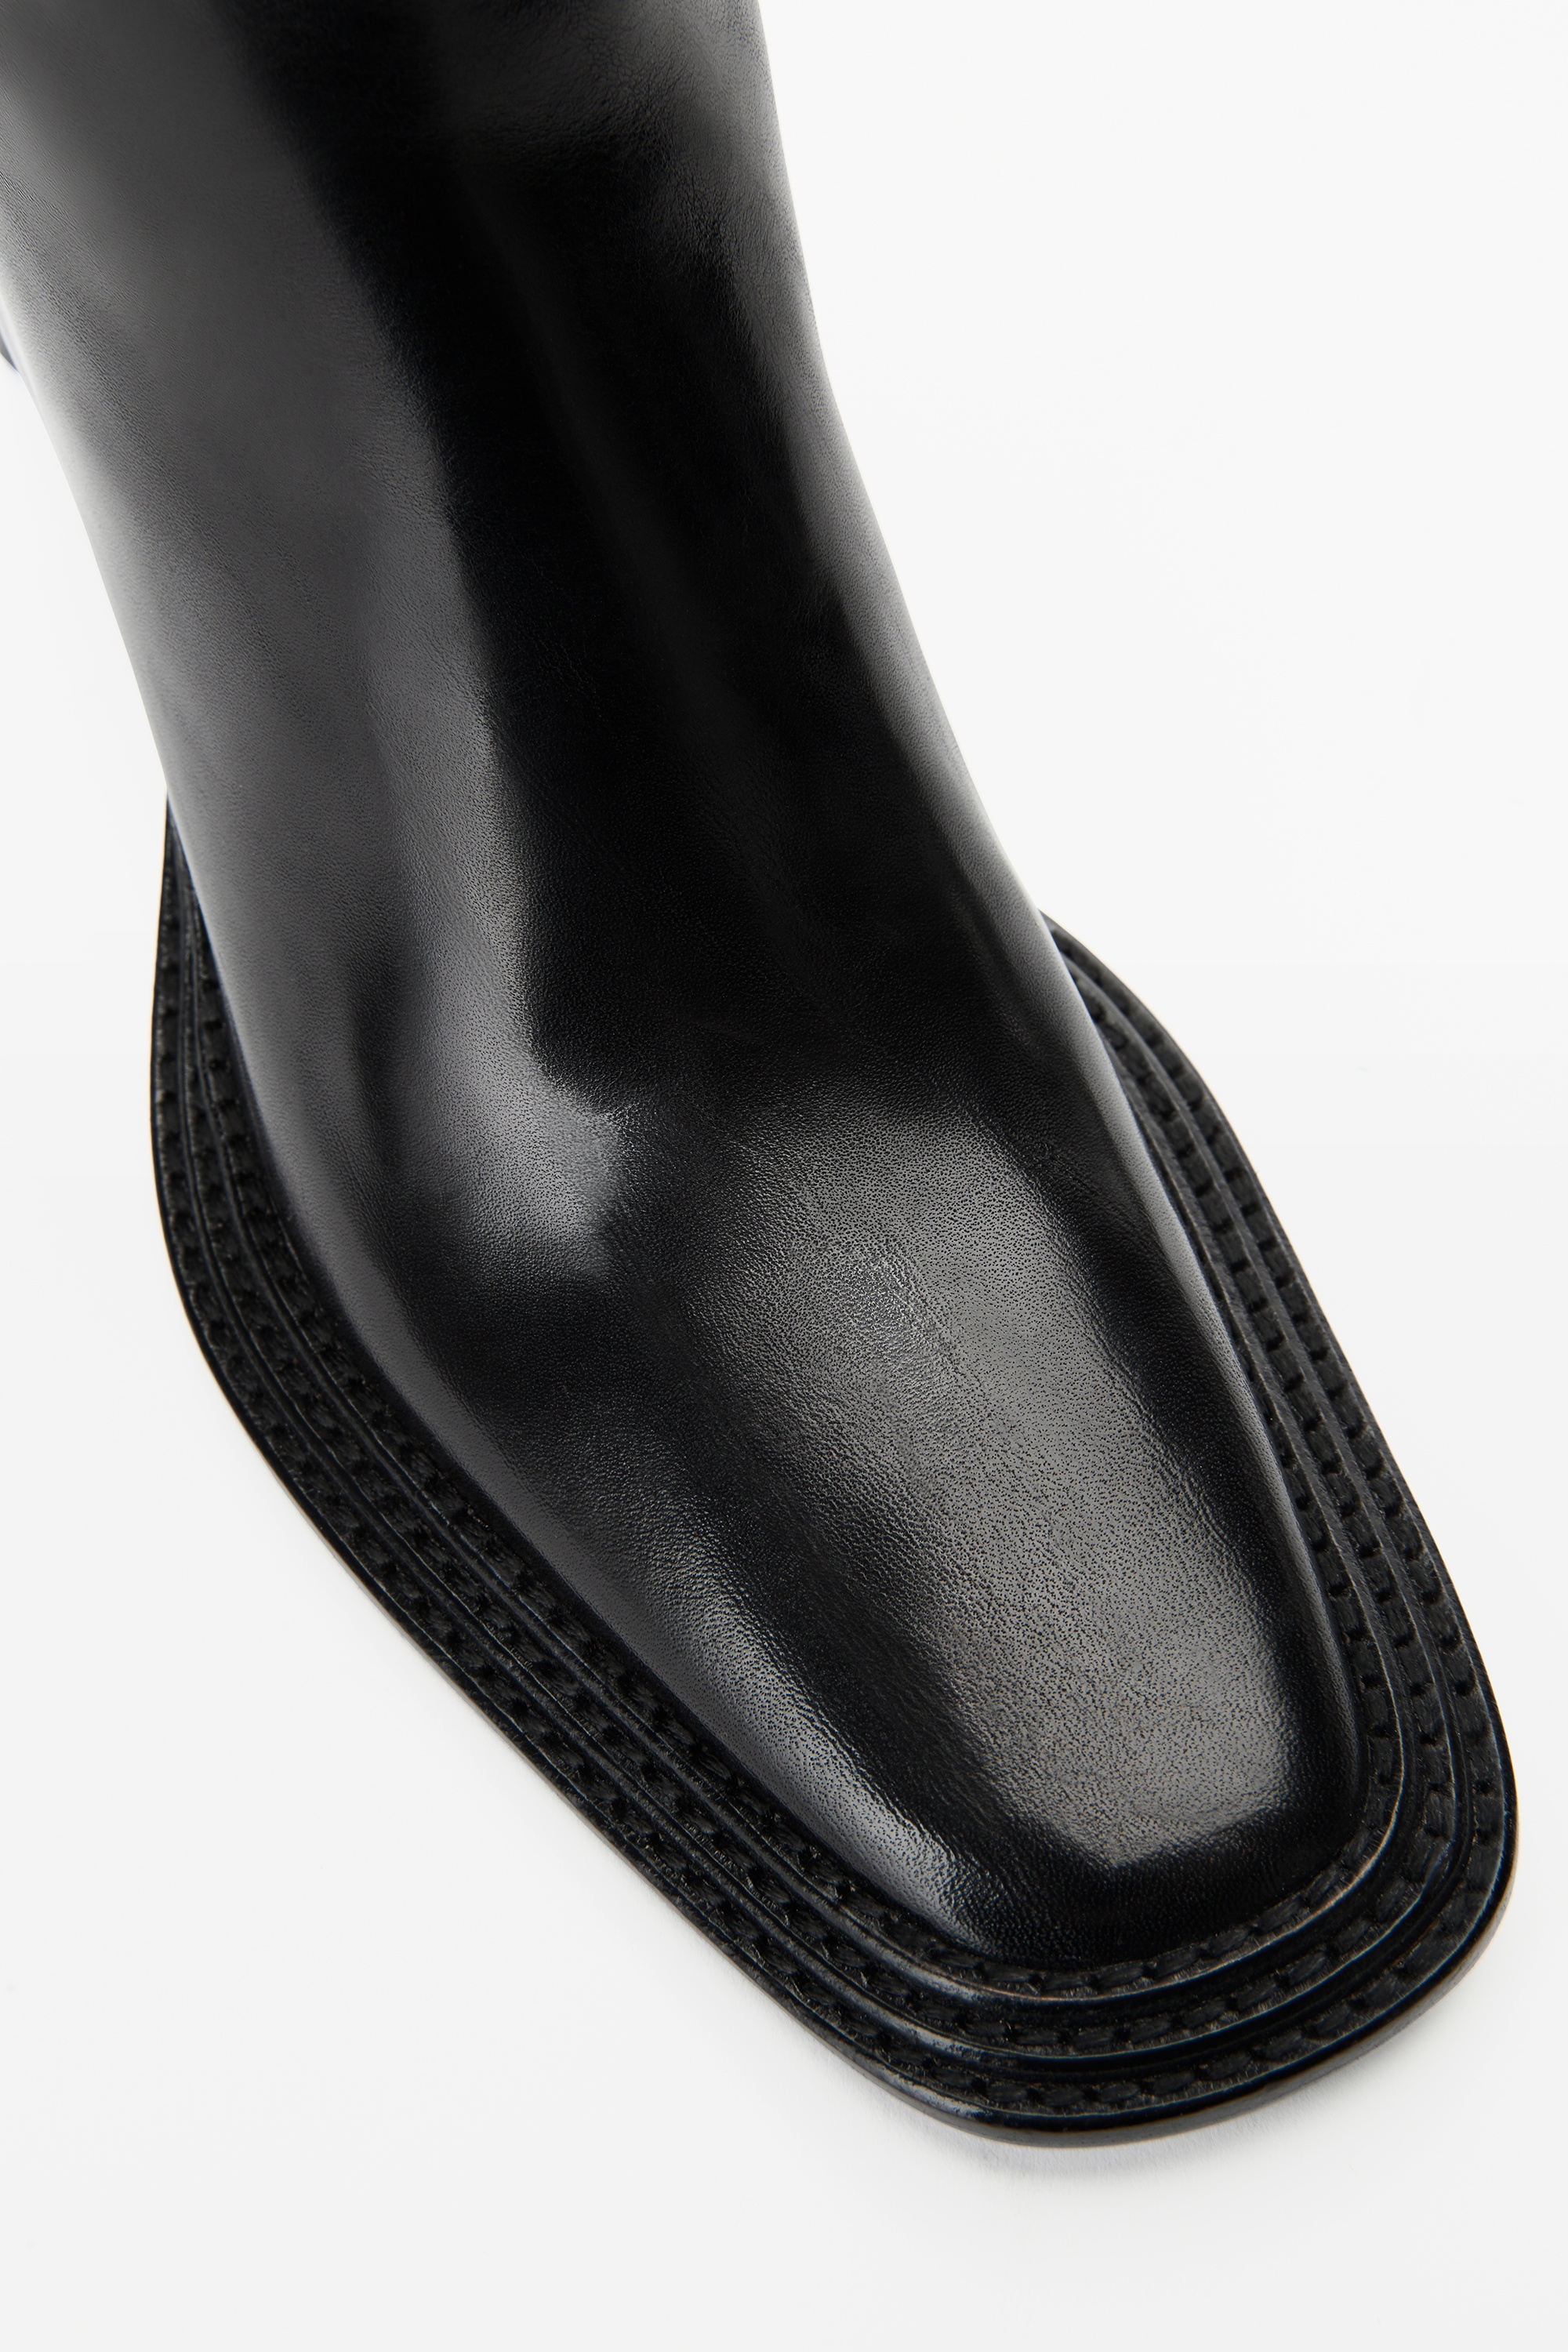 BOOKER 60 RIDING BOOT IN COW LEATHER - 3